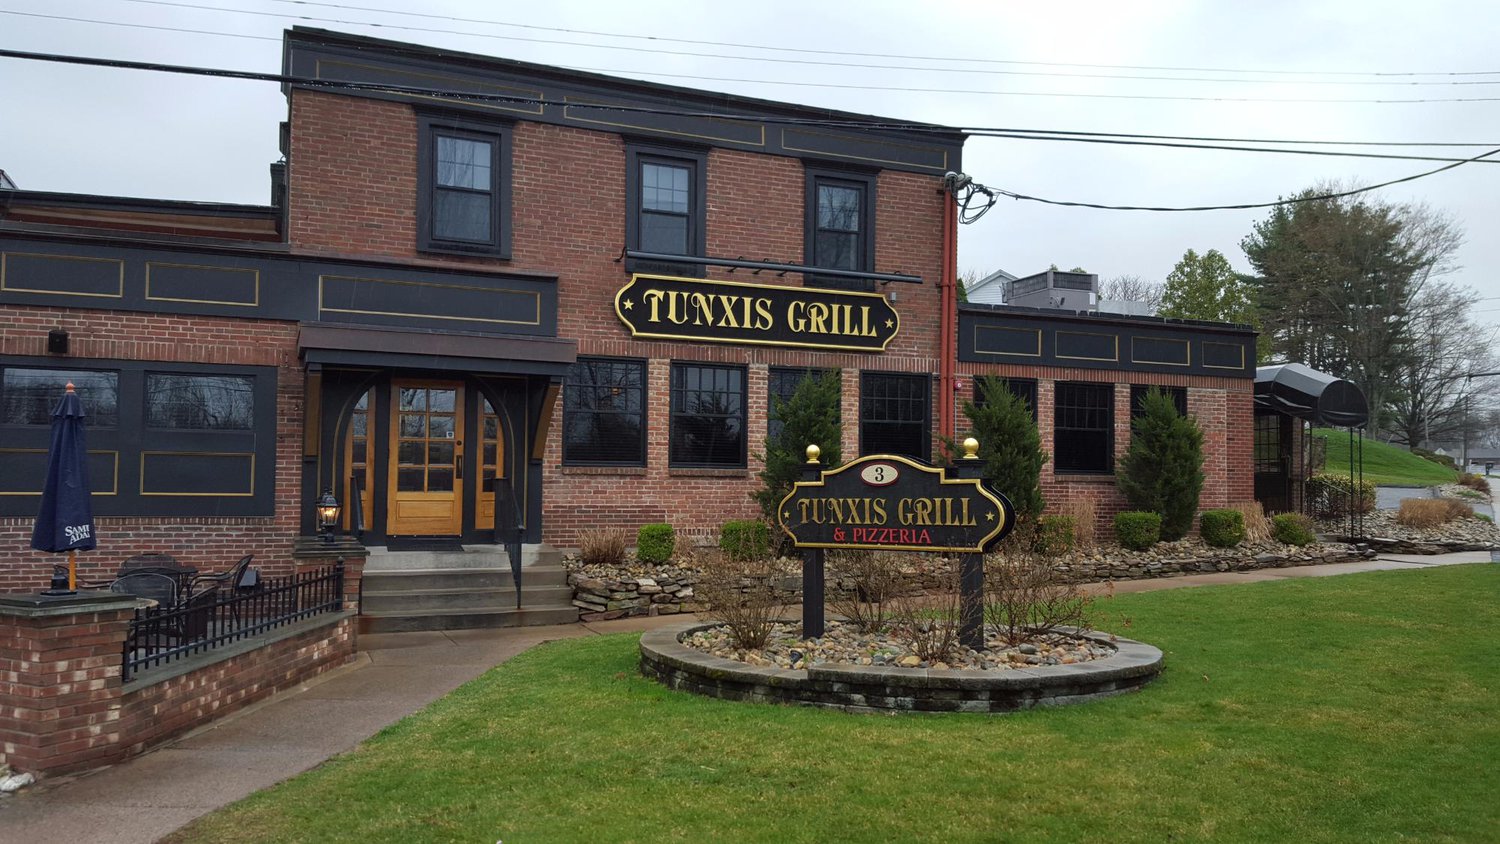 Tunxis Grill Windsor Ct